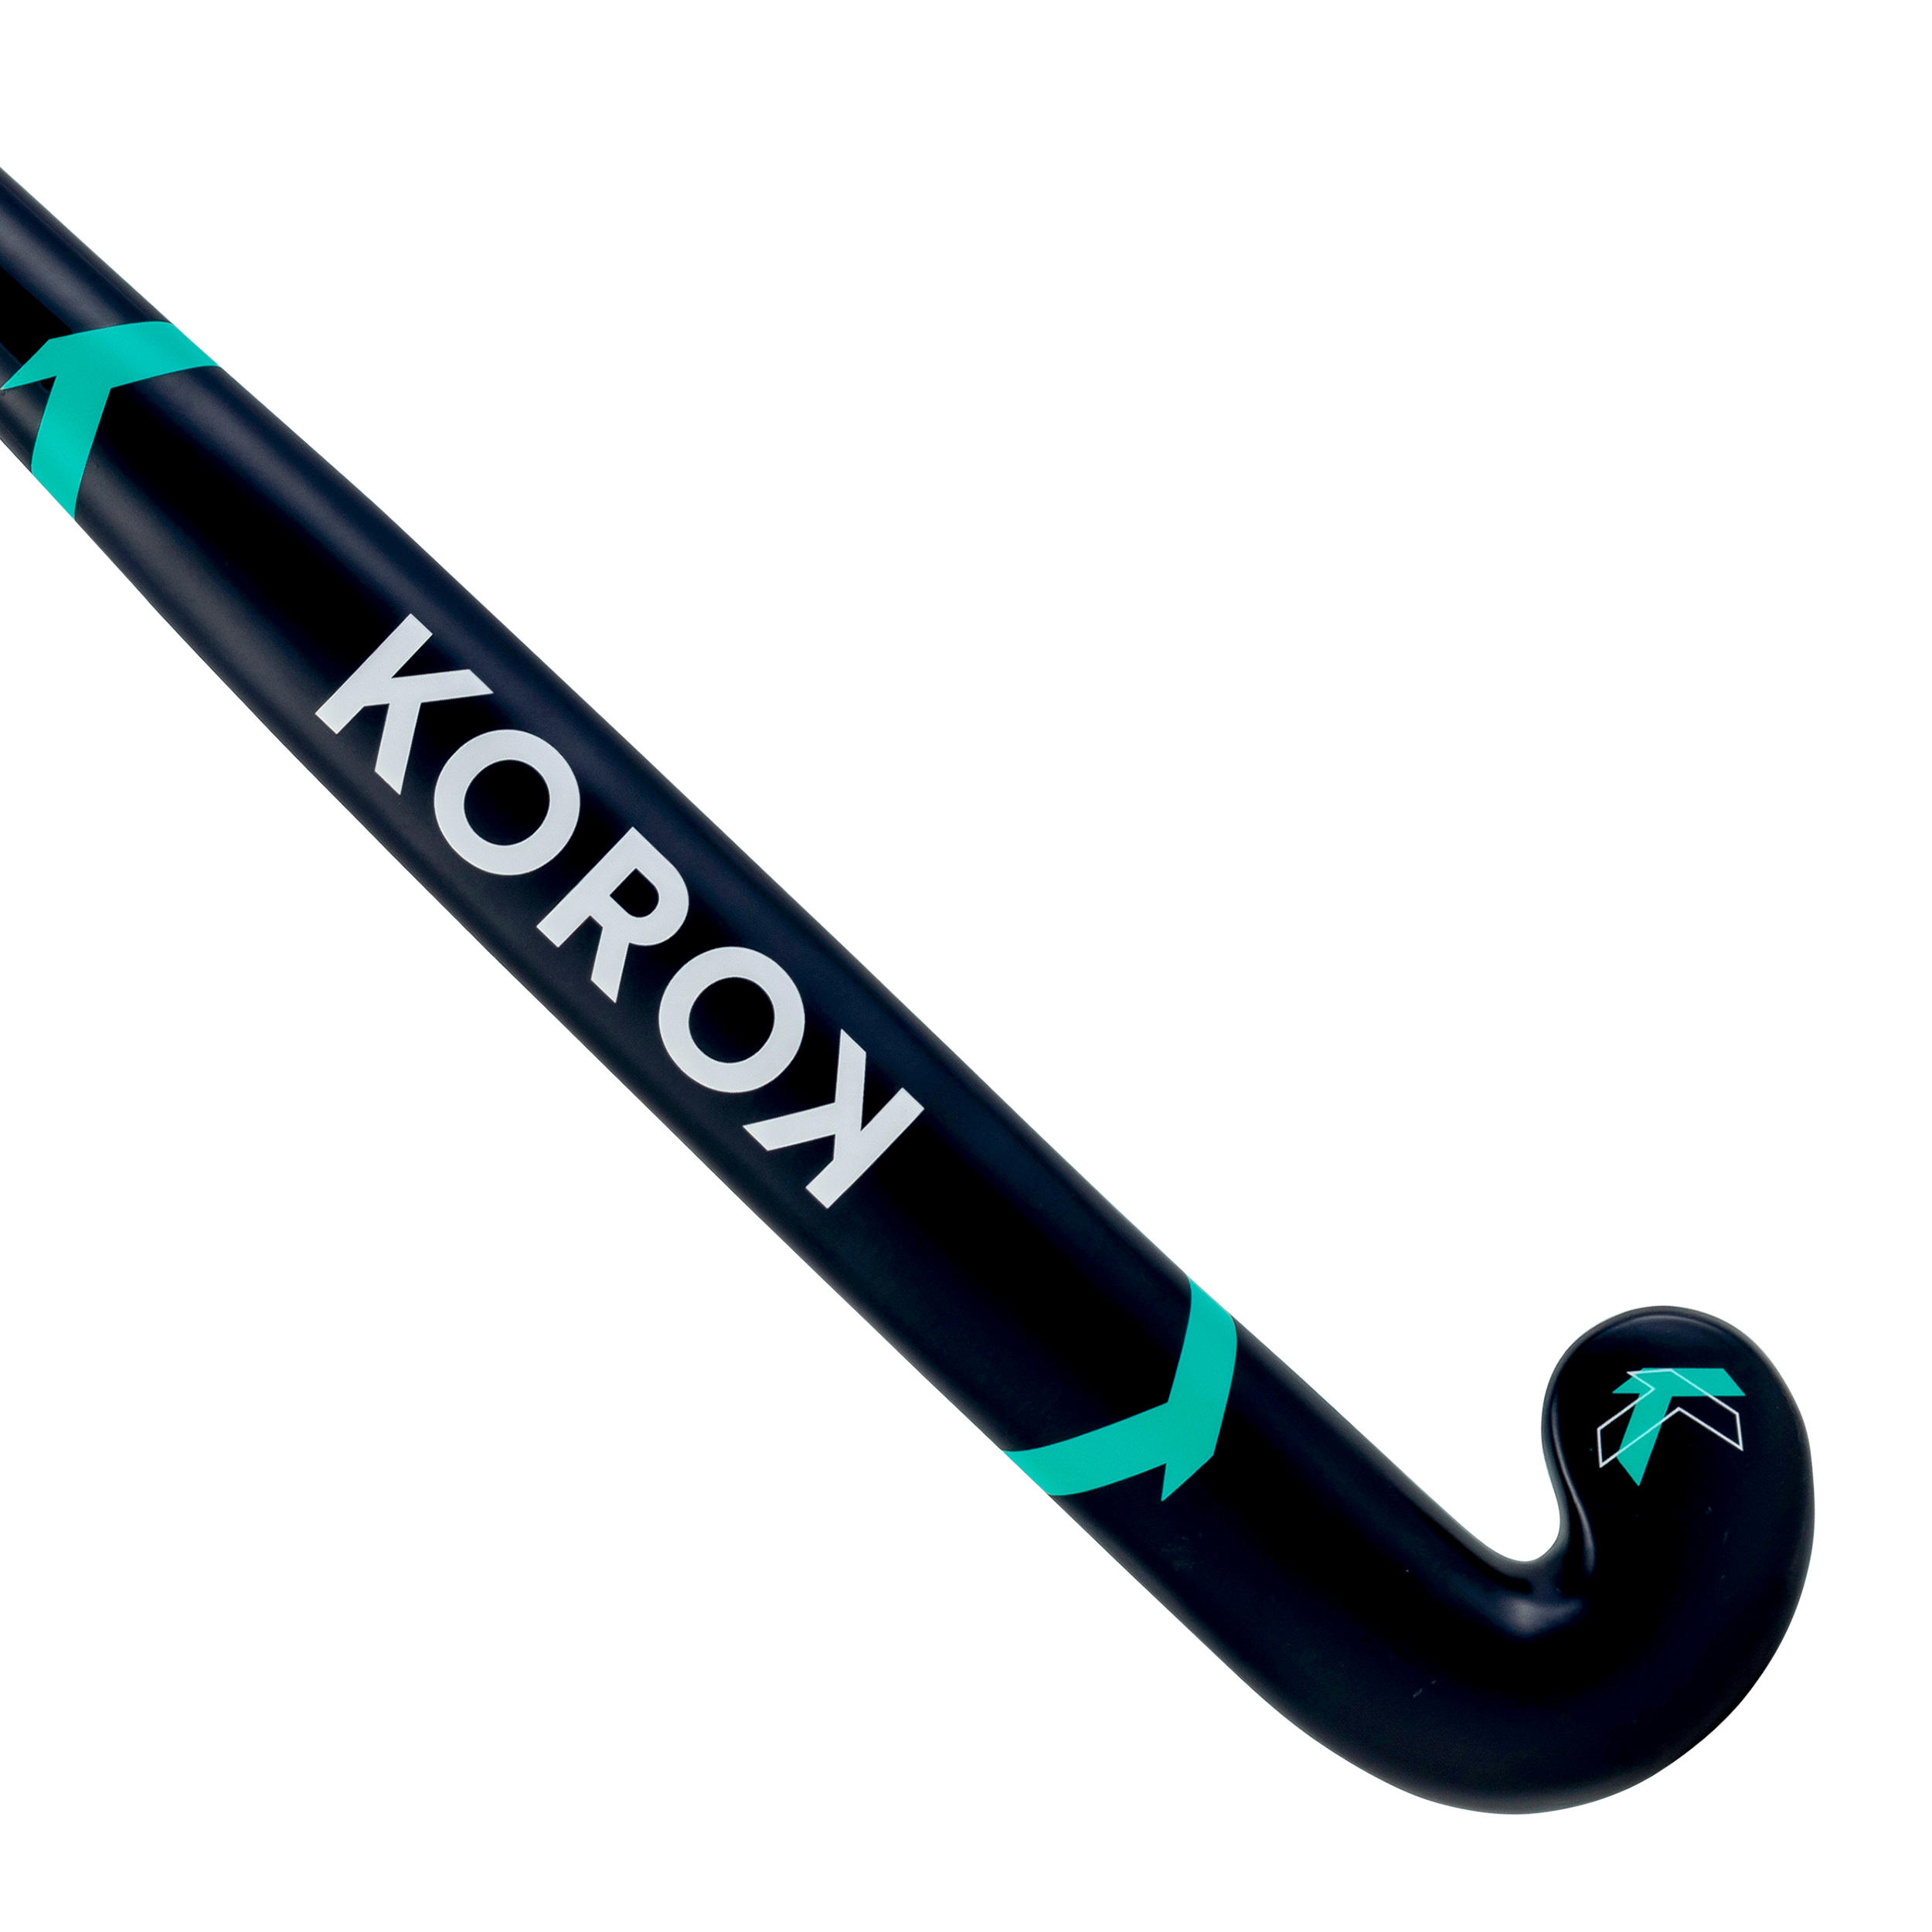 Adult Occasional Wood/Fibreglass Field Hockey Stick FH100 - Turquoise Blue 8/12